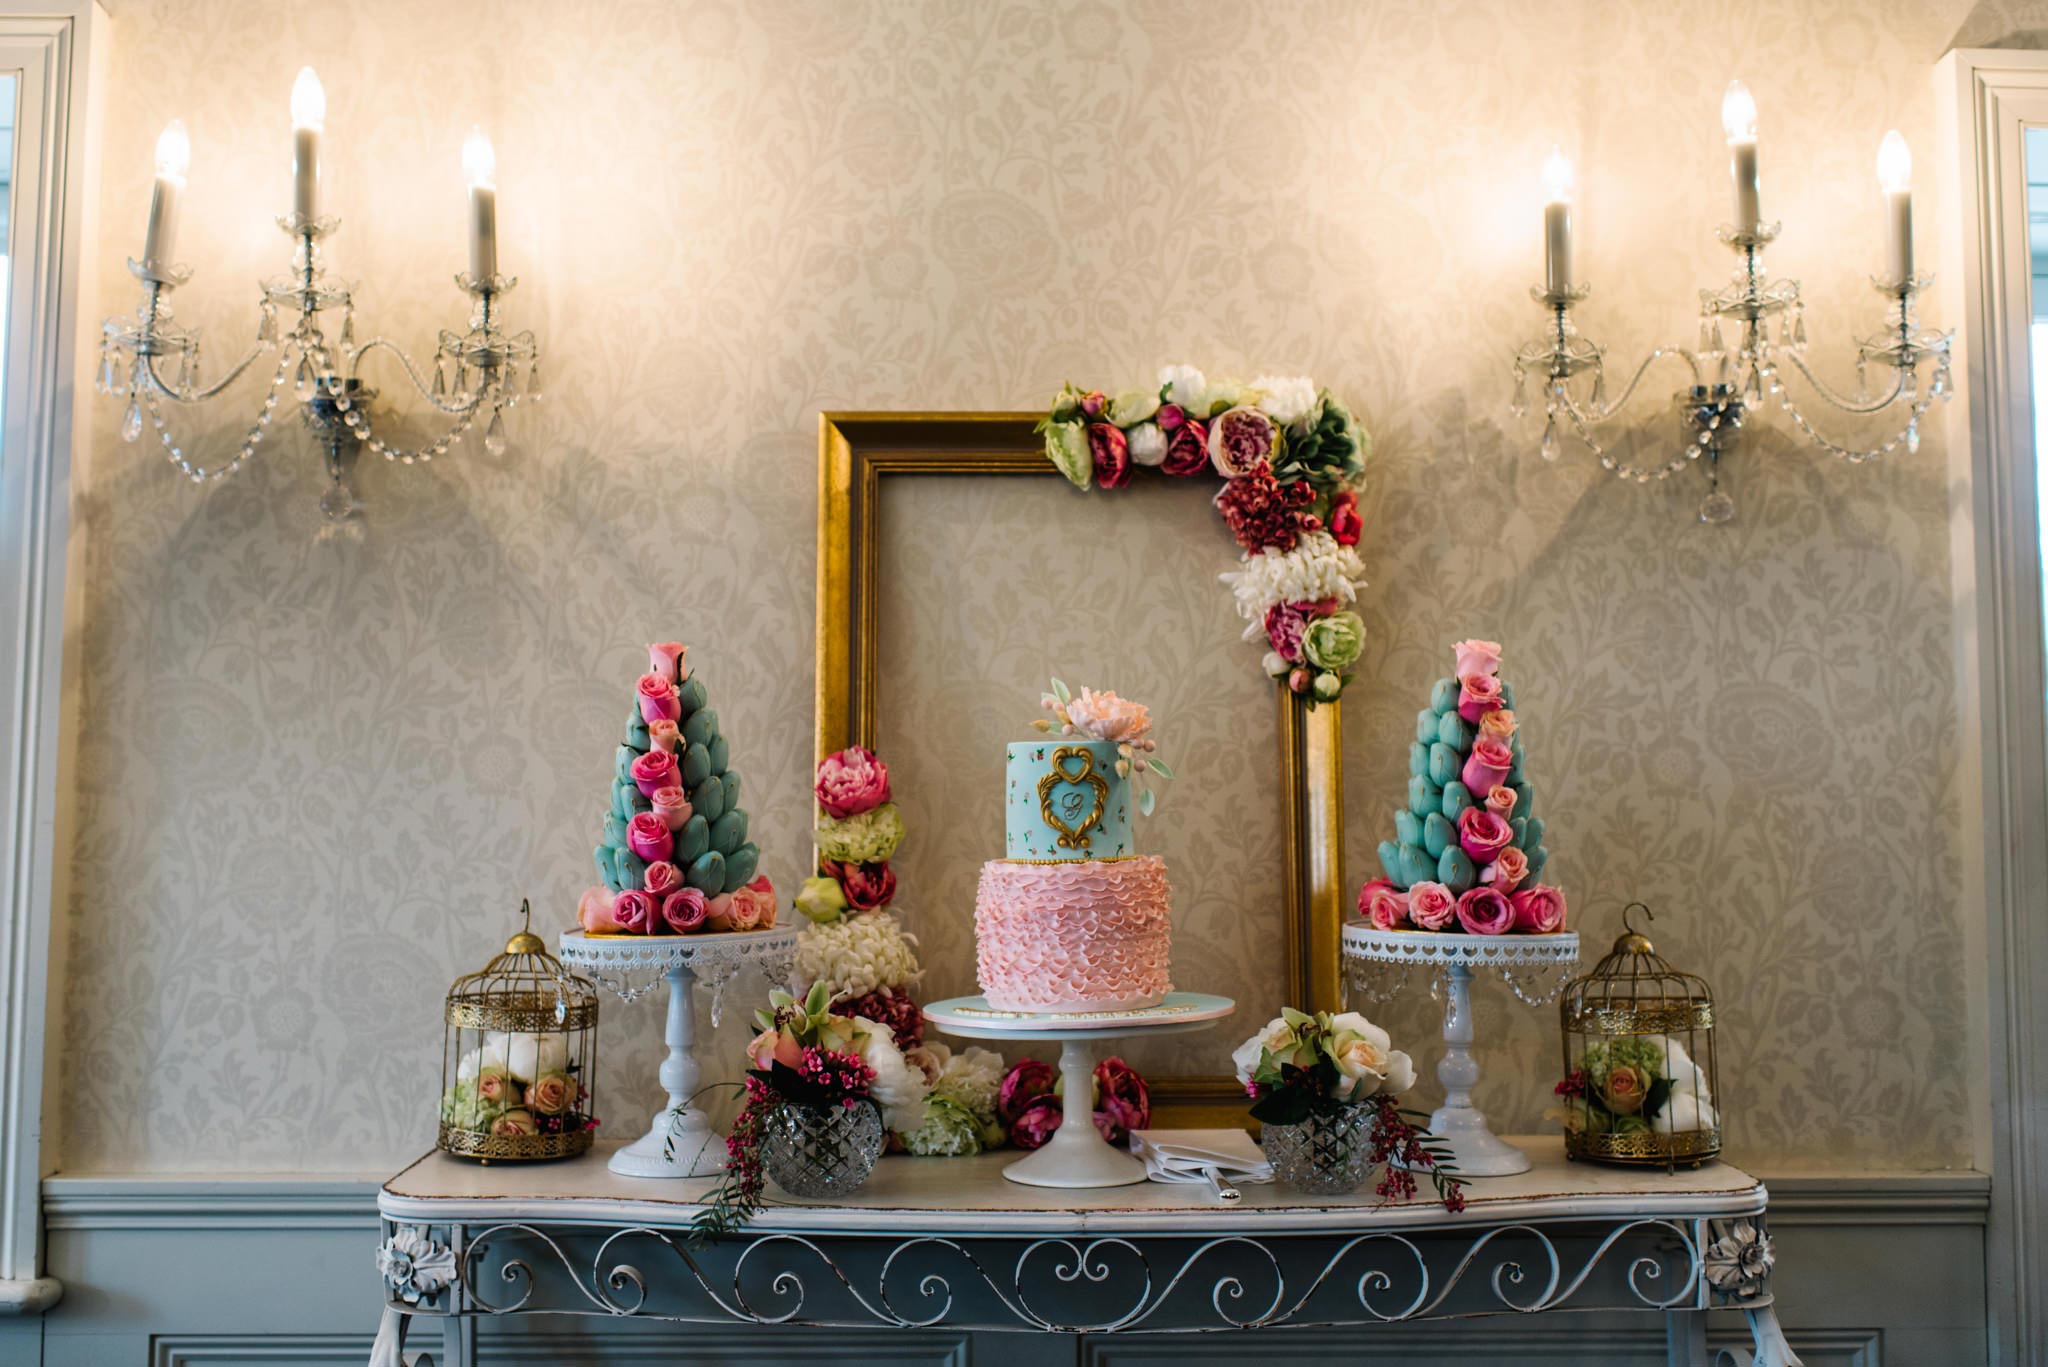 Cake table and decorative wall sconces at Dunbar House